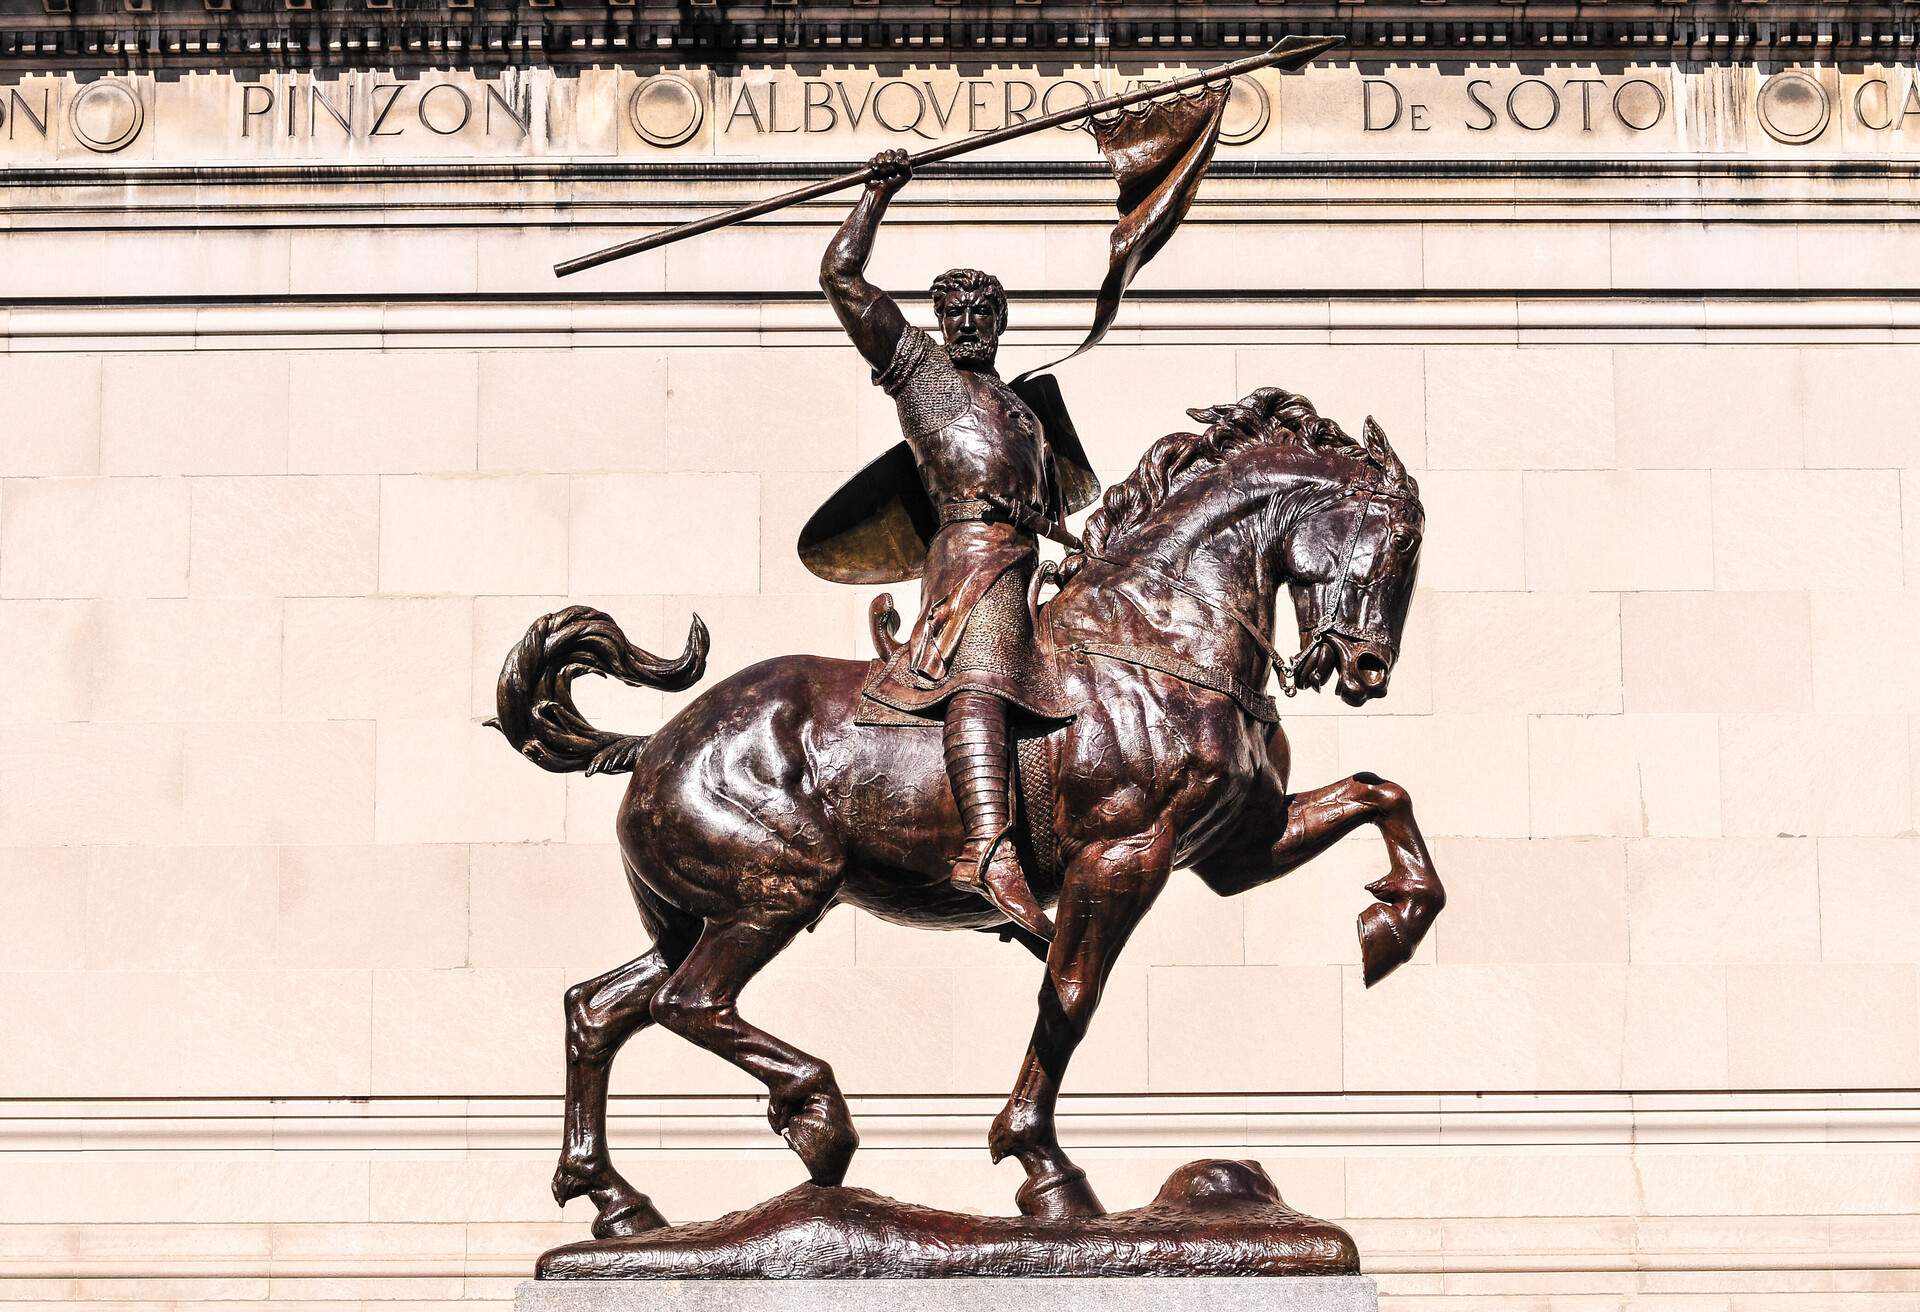 Equestrian statue of legendary Spanish Castilian nobleman and military leader El Cid at the Hispanic Society of America Museum at 155th Street and Broadway.